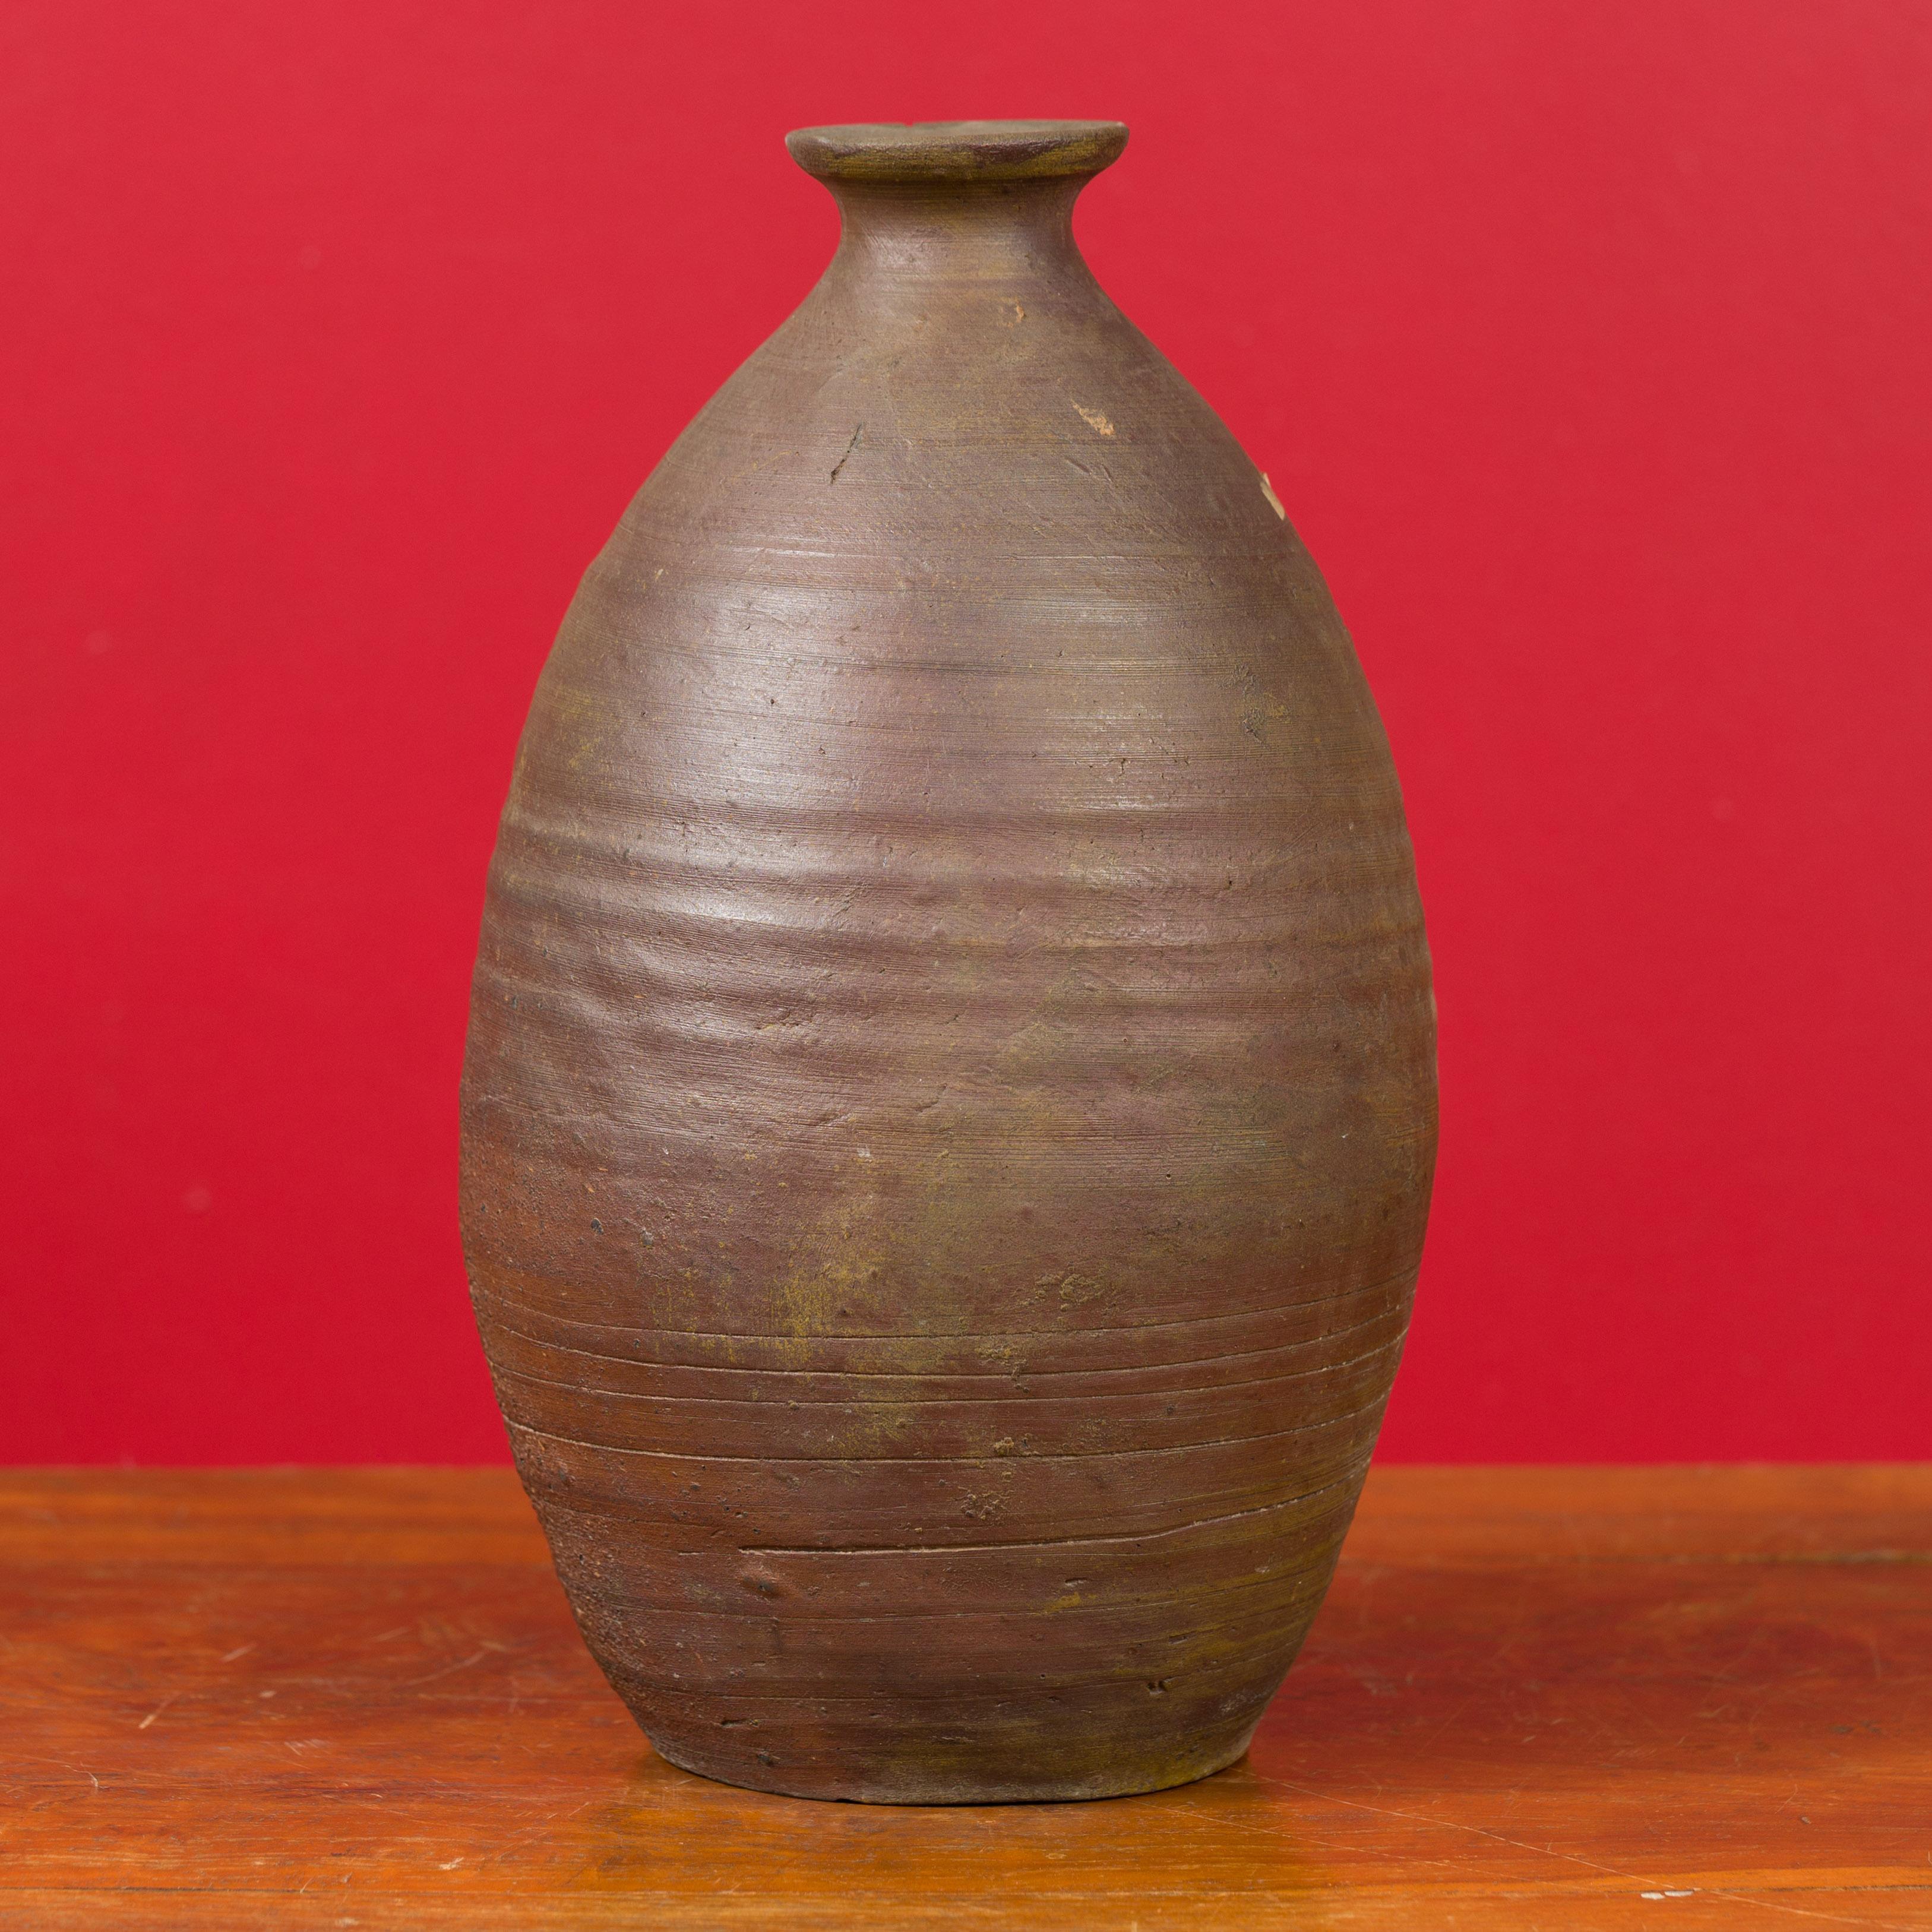 Japanese Meiji Period Early 20th Century Sake Bottle with Brown Patina In Good Condition For Sale In Yonkers, NY